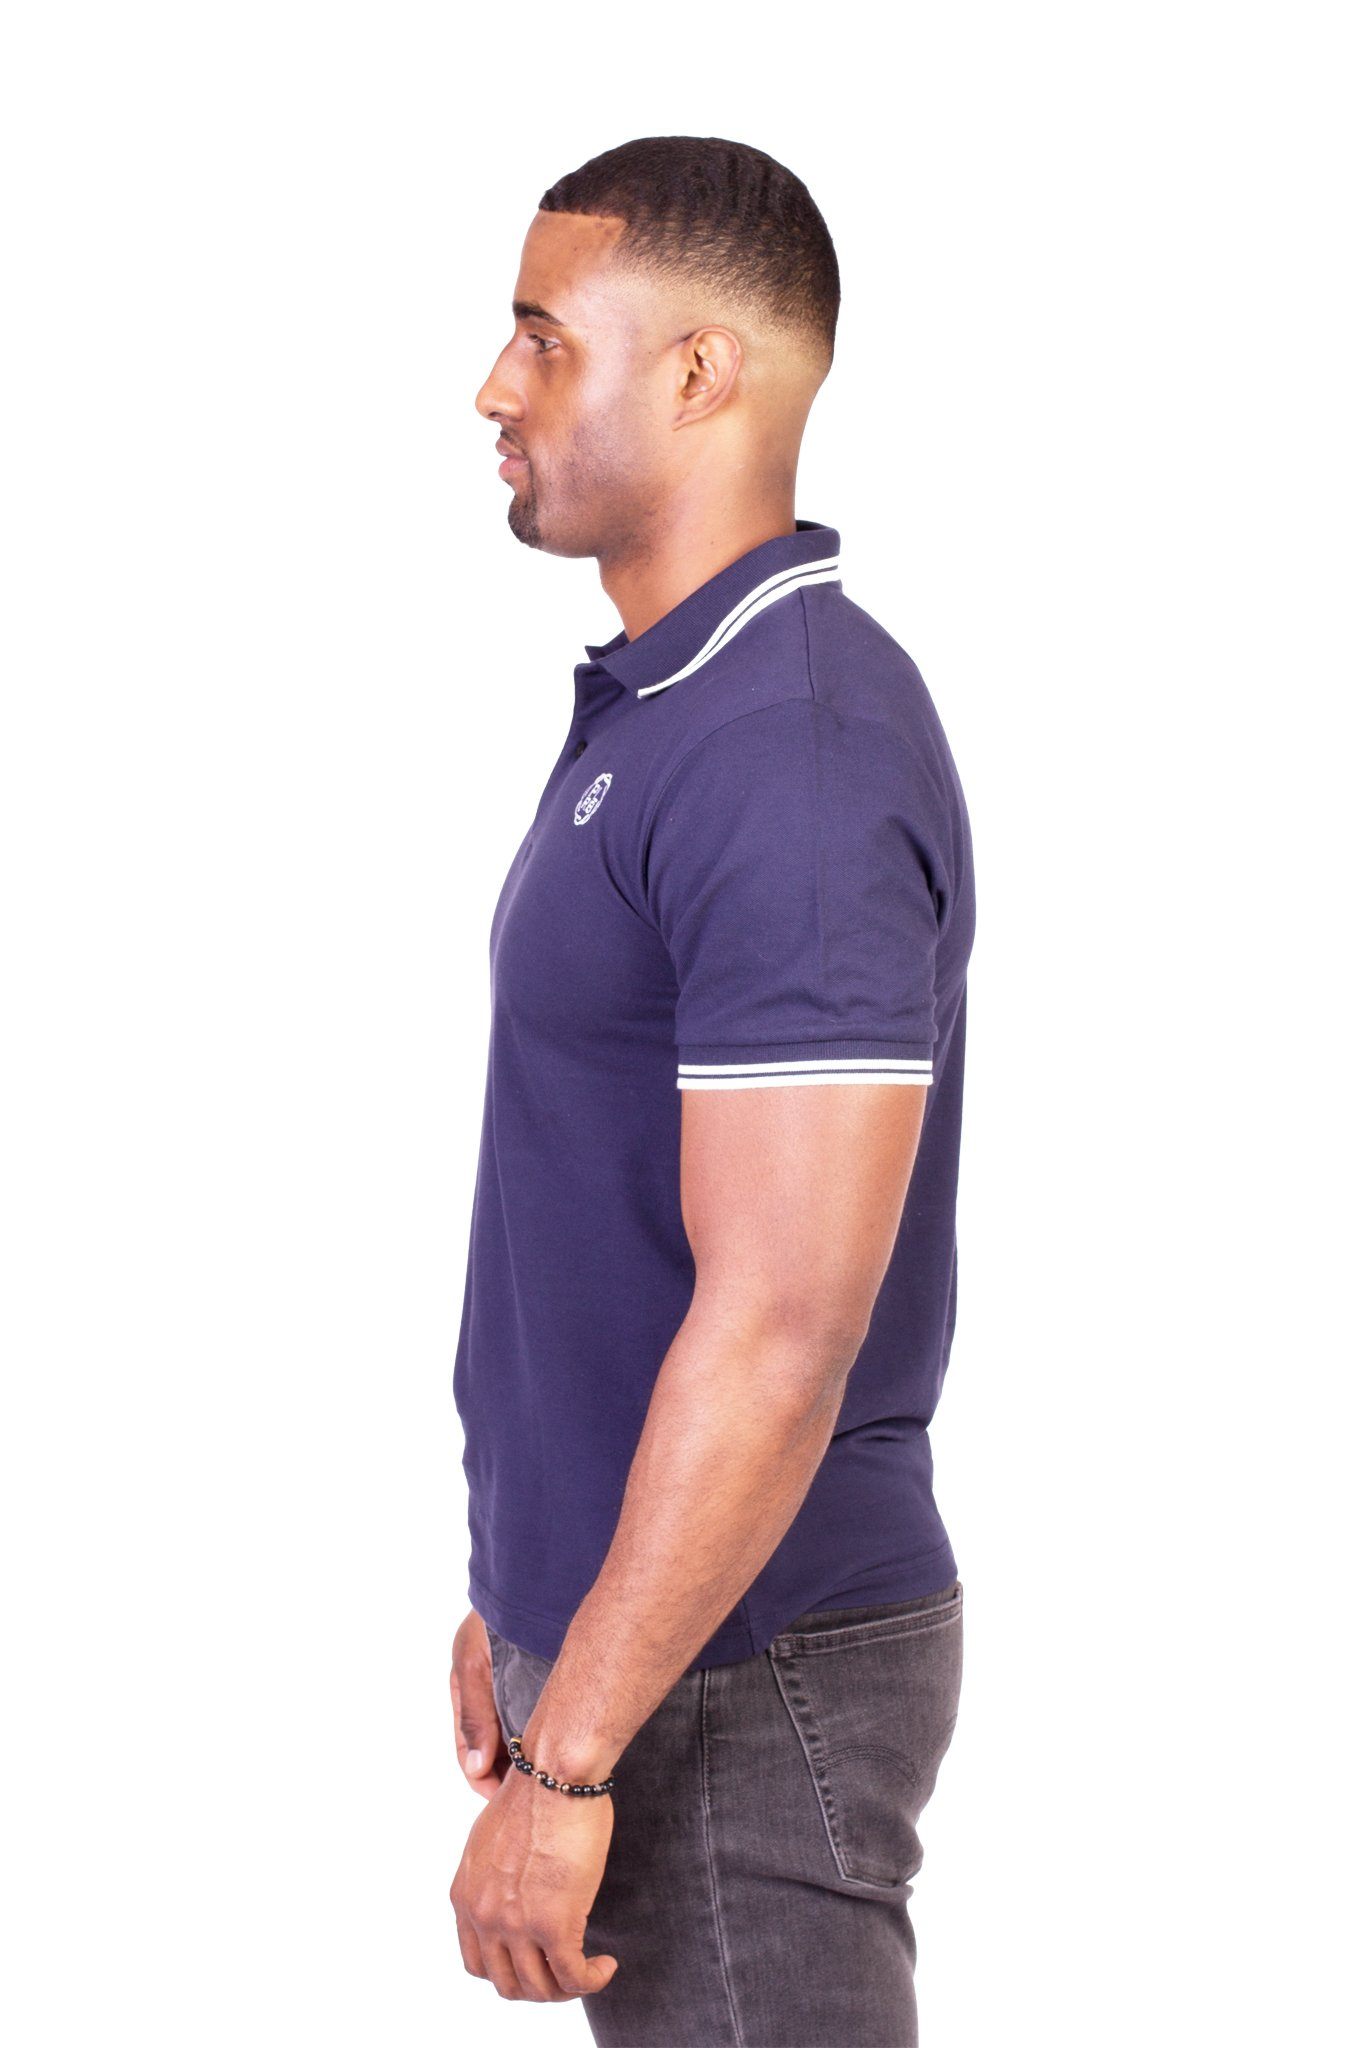 BELVEDERE POLO SHIRT IN NAVY BLUE | Poor Little Rich Boy Clothing